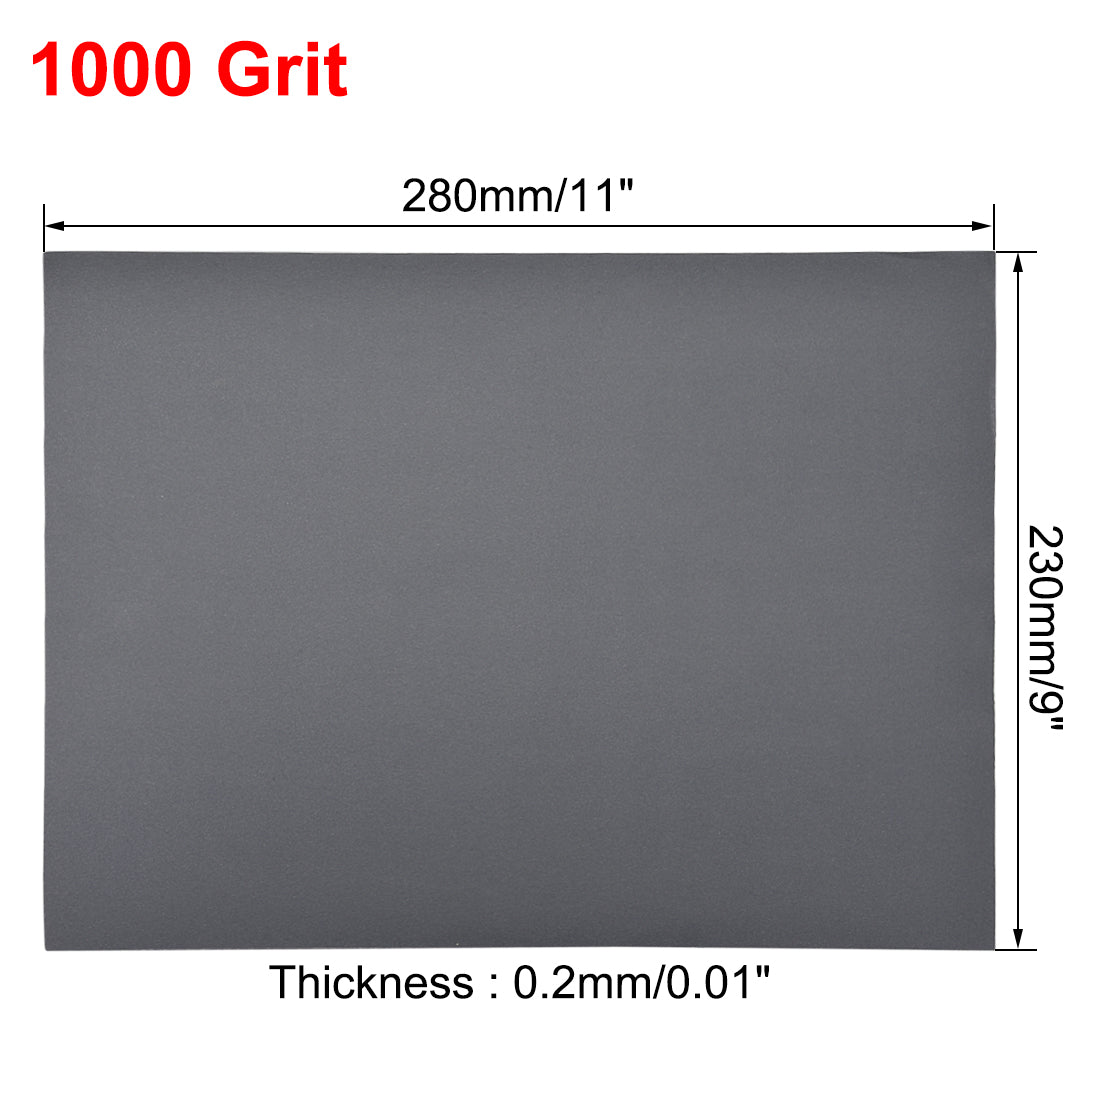 uxcell Uxcell Waterproof Sandpaper Wet Dry Sand Paper Grit 1000 11" x 9" 10pcs